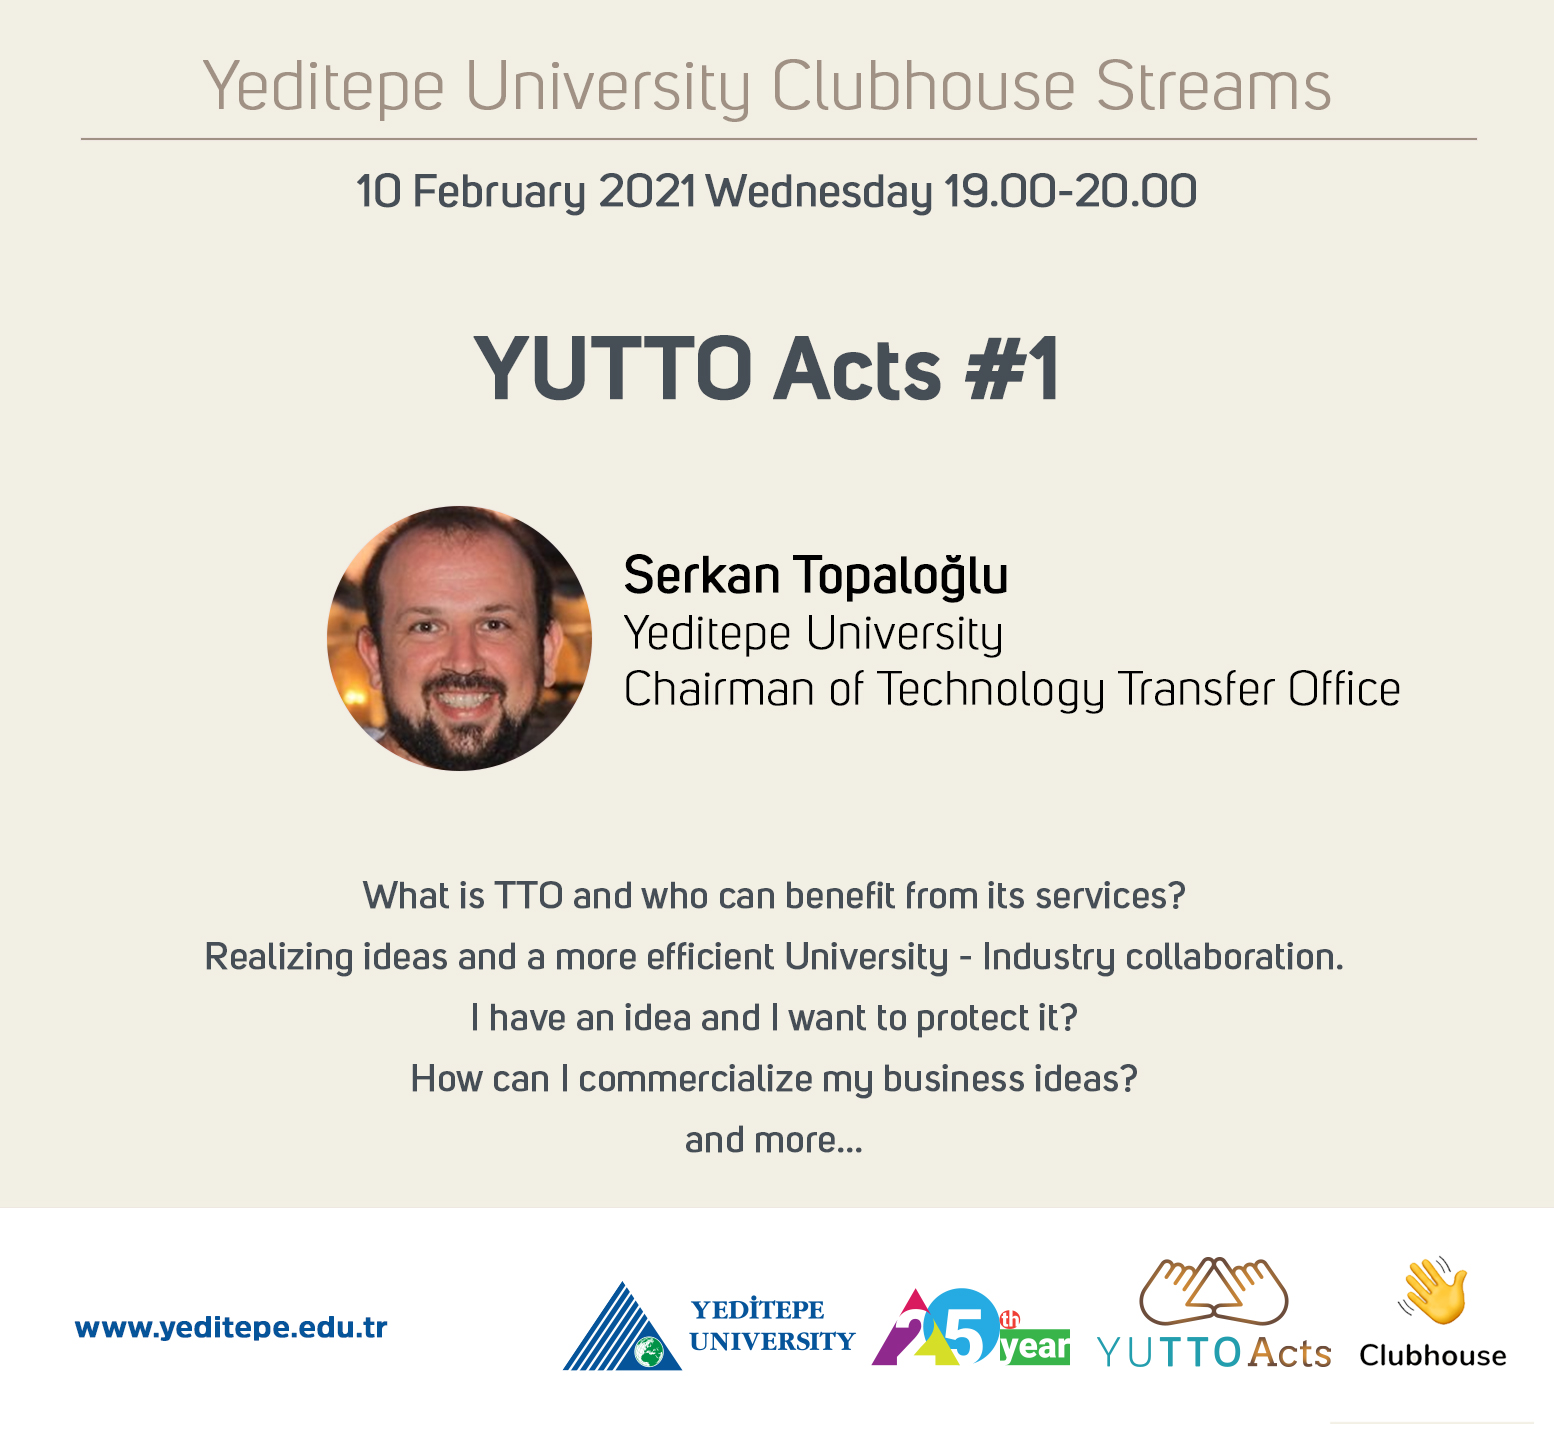 Yeditepe University Clubhouse Streams | YUTTO Acts #1